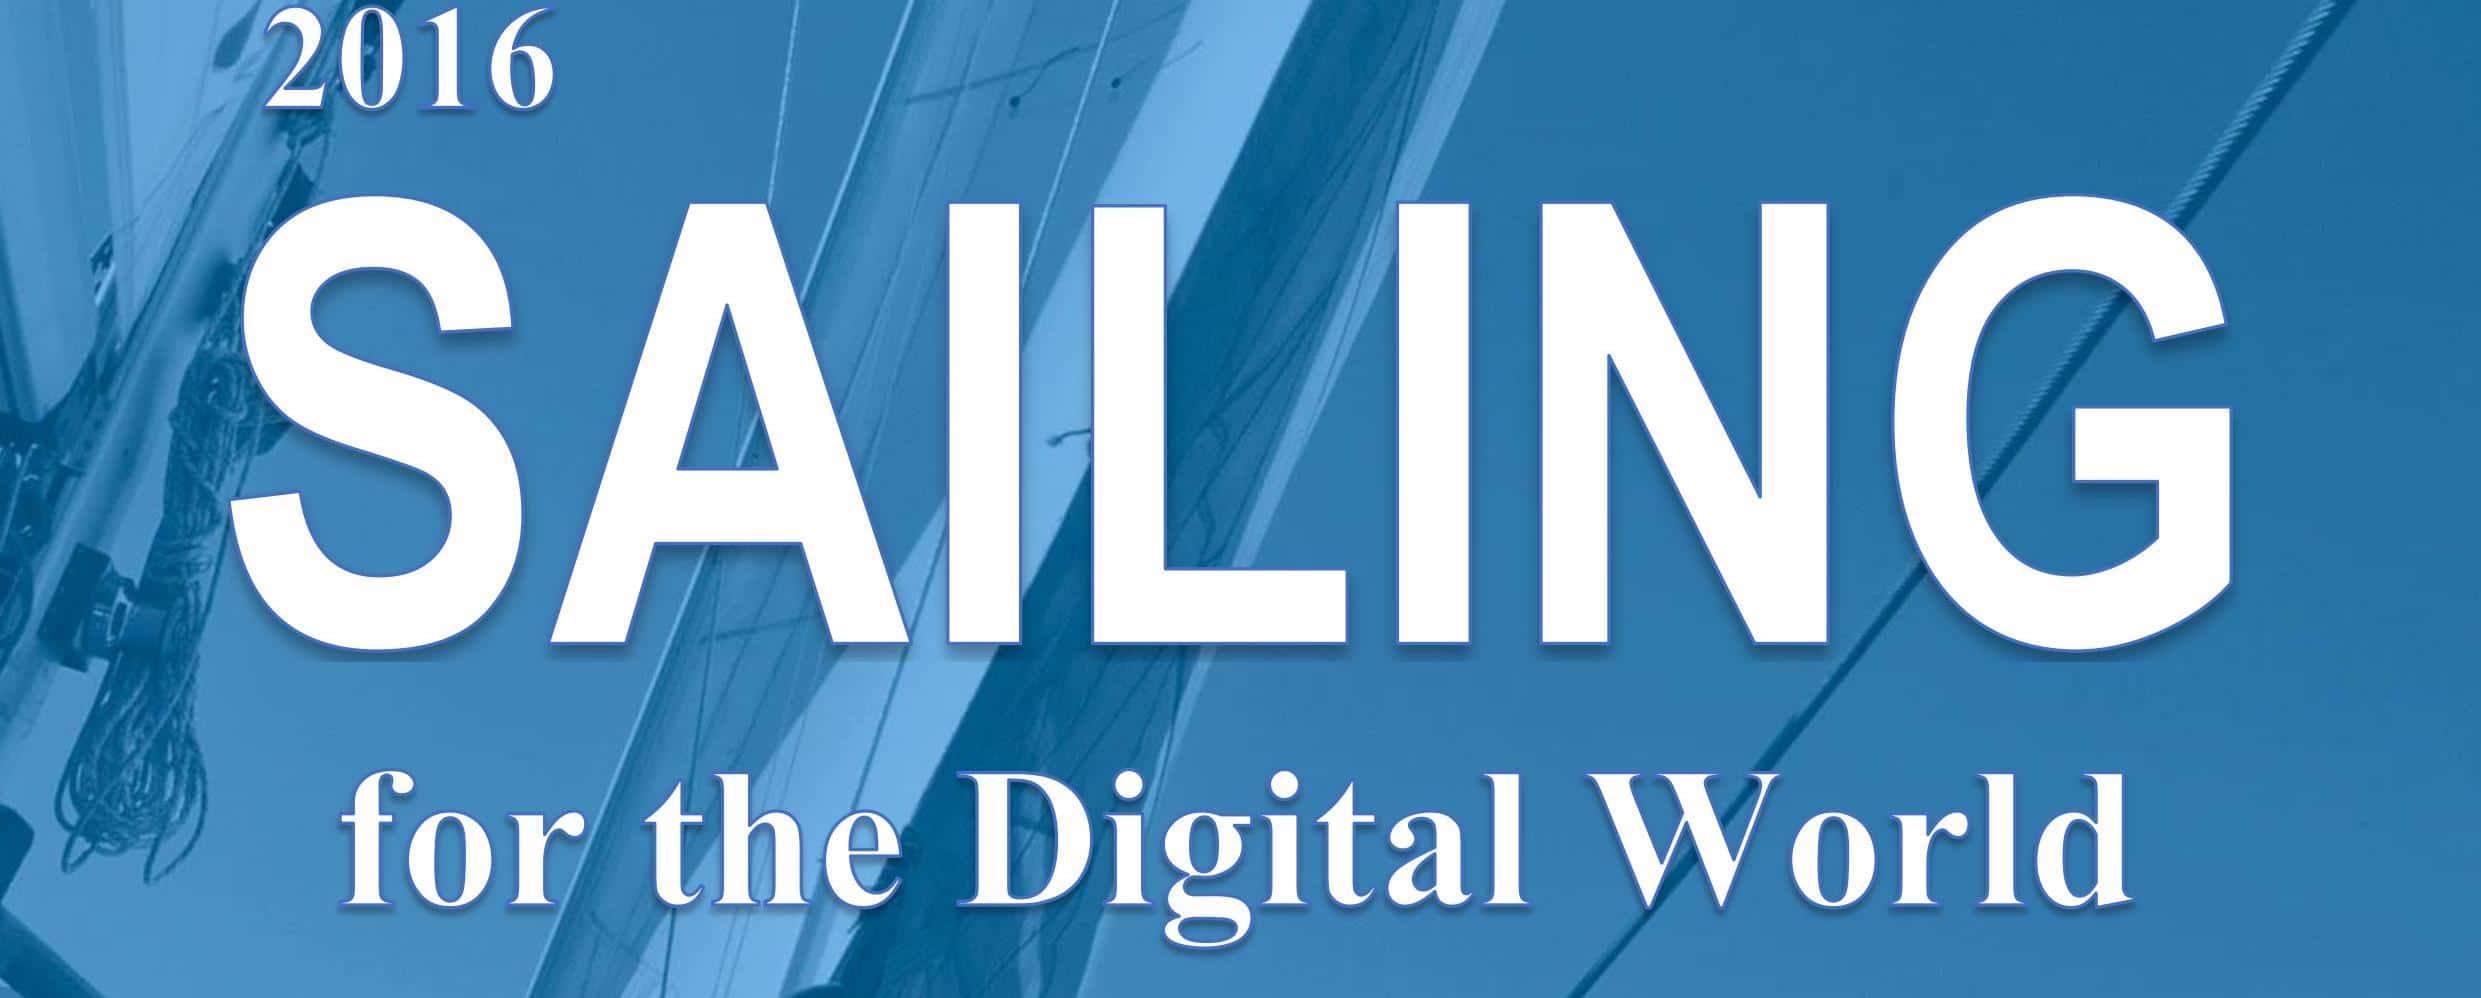 SAILING FOR THE DIGITAL WORLD